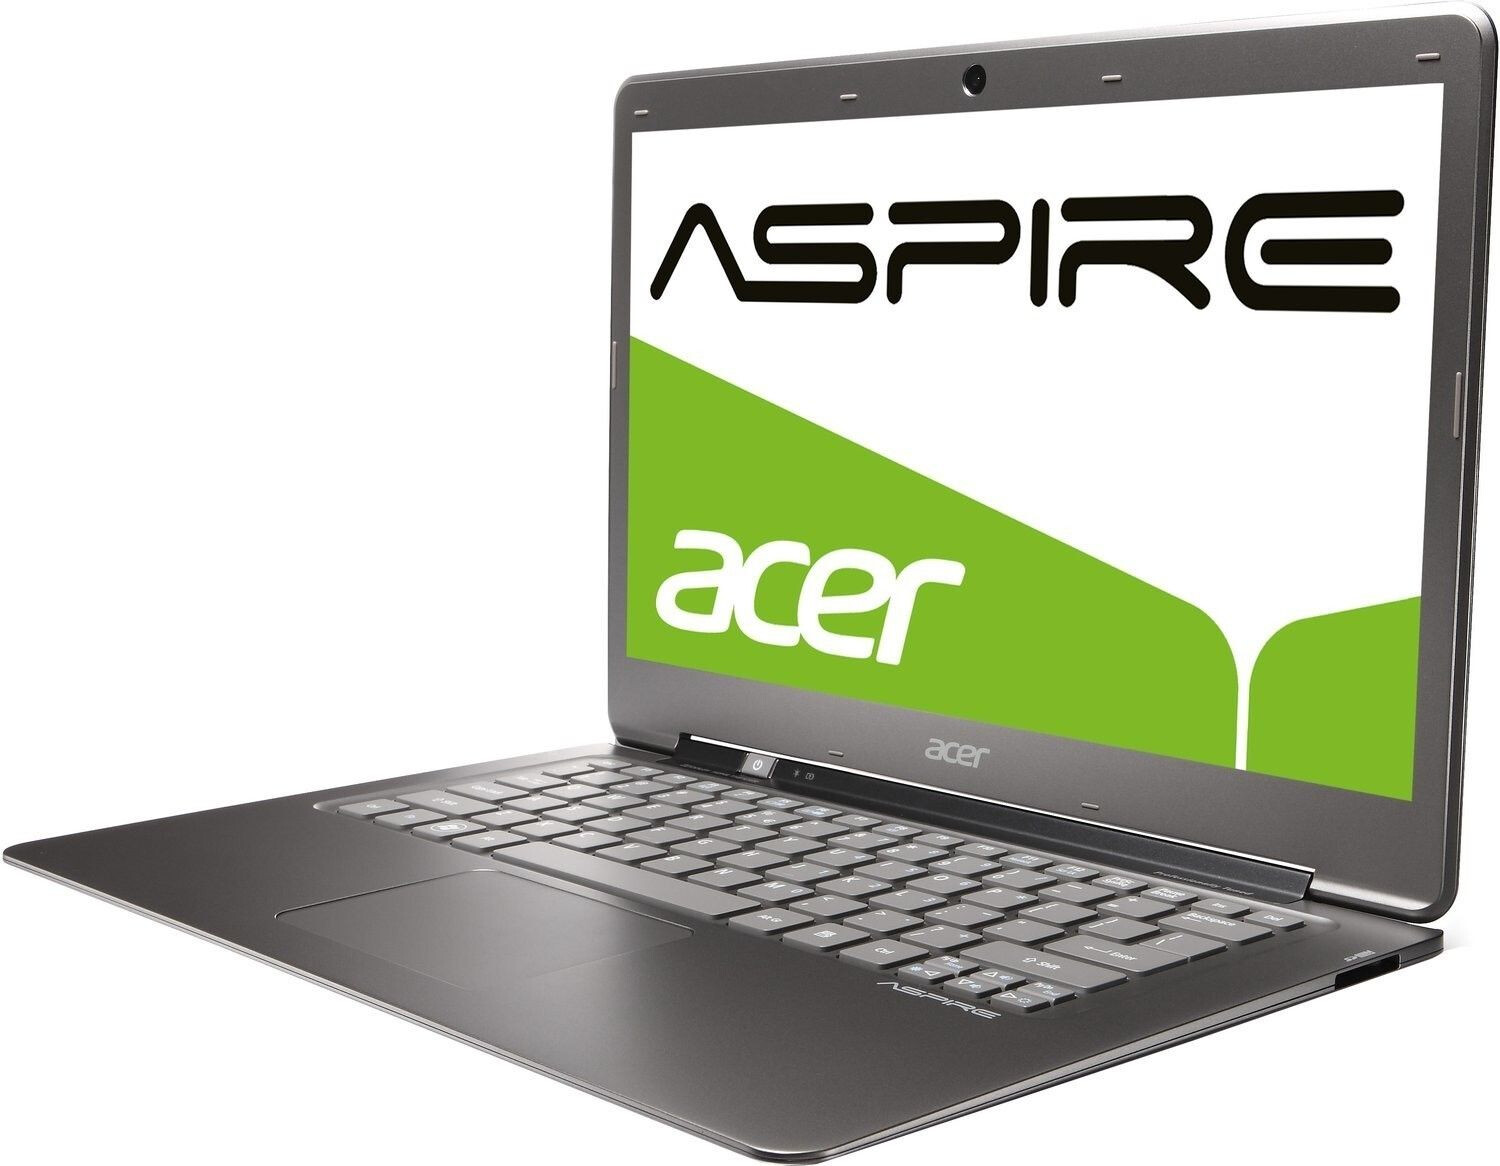 Acer Aspire S3-951-2464G25iss (LX.RSE02.049)